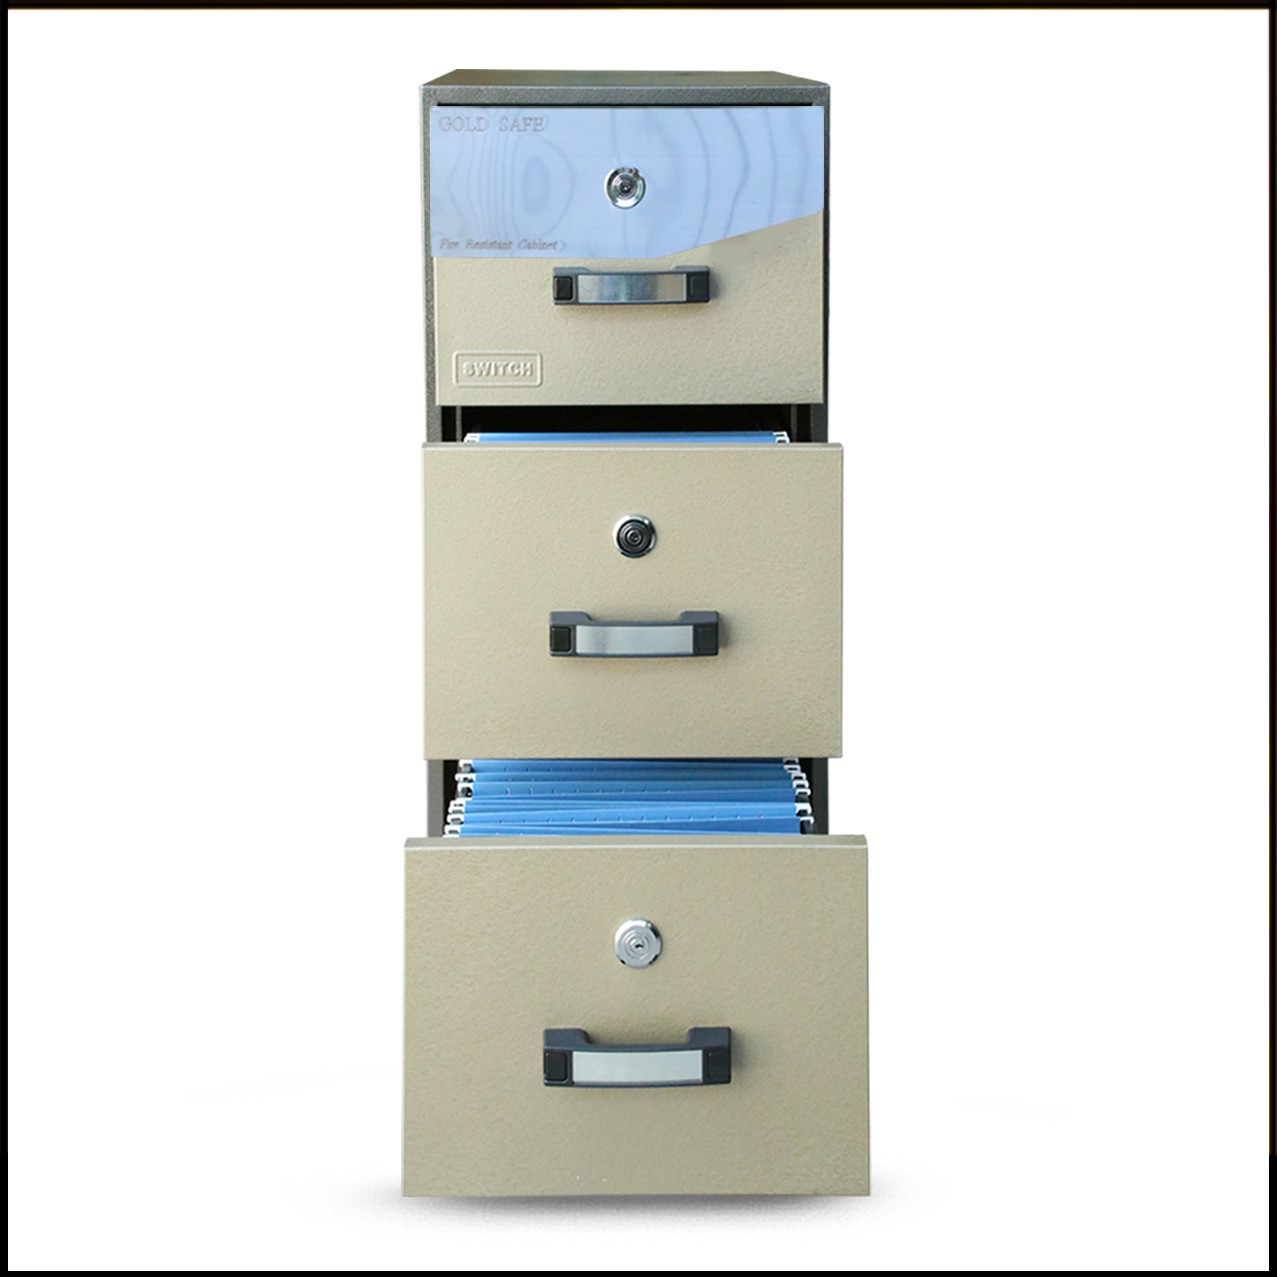 Fire-Resistant File Cabinets